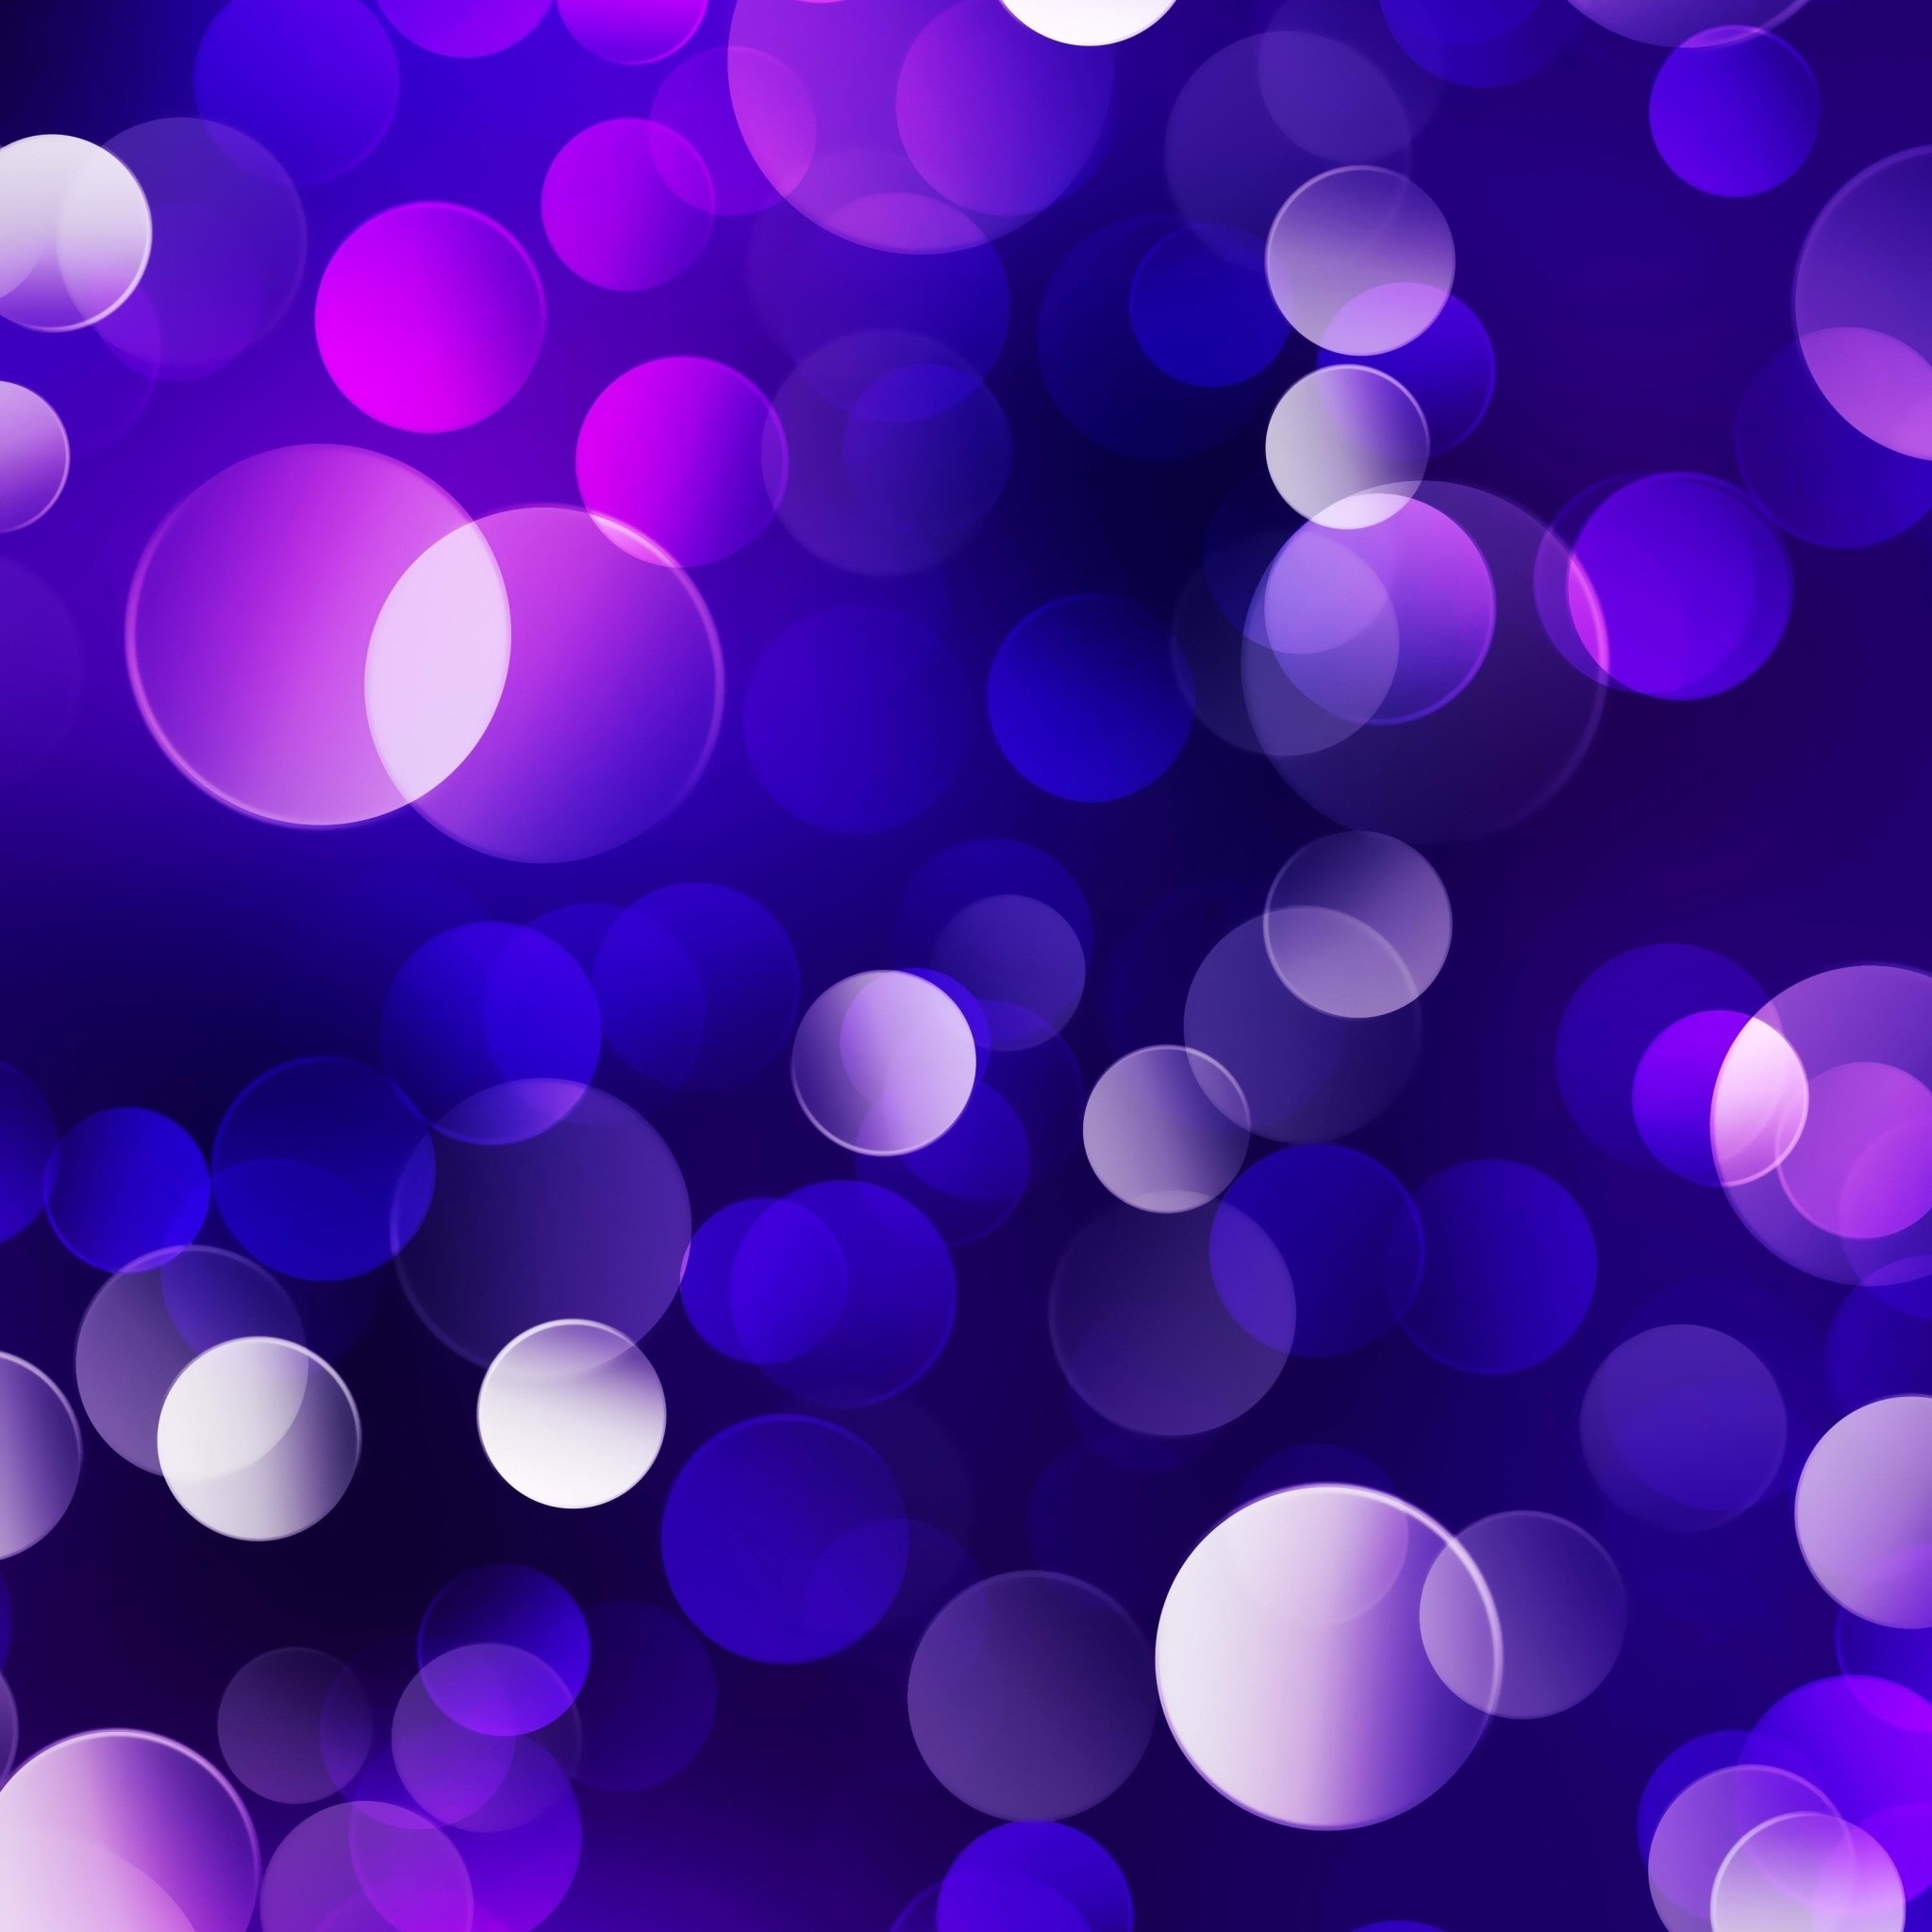 2048x2048 Purple Abstract Background HD wallpaper download in , 1024x1024  resolutions. Find similar and same